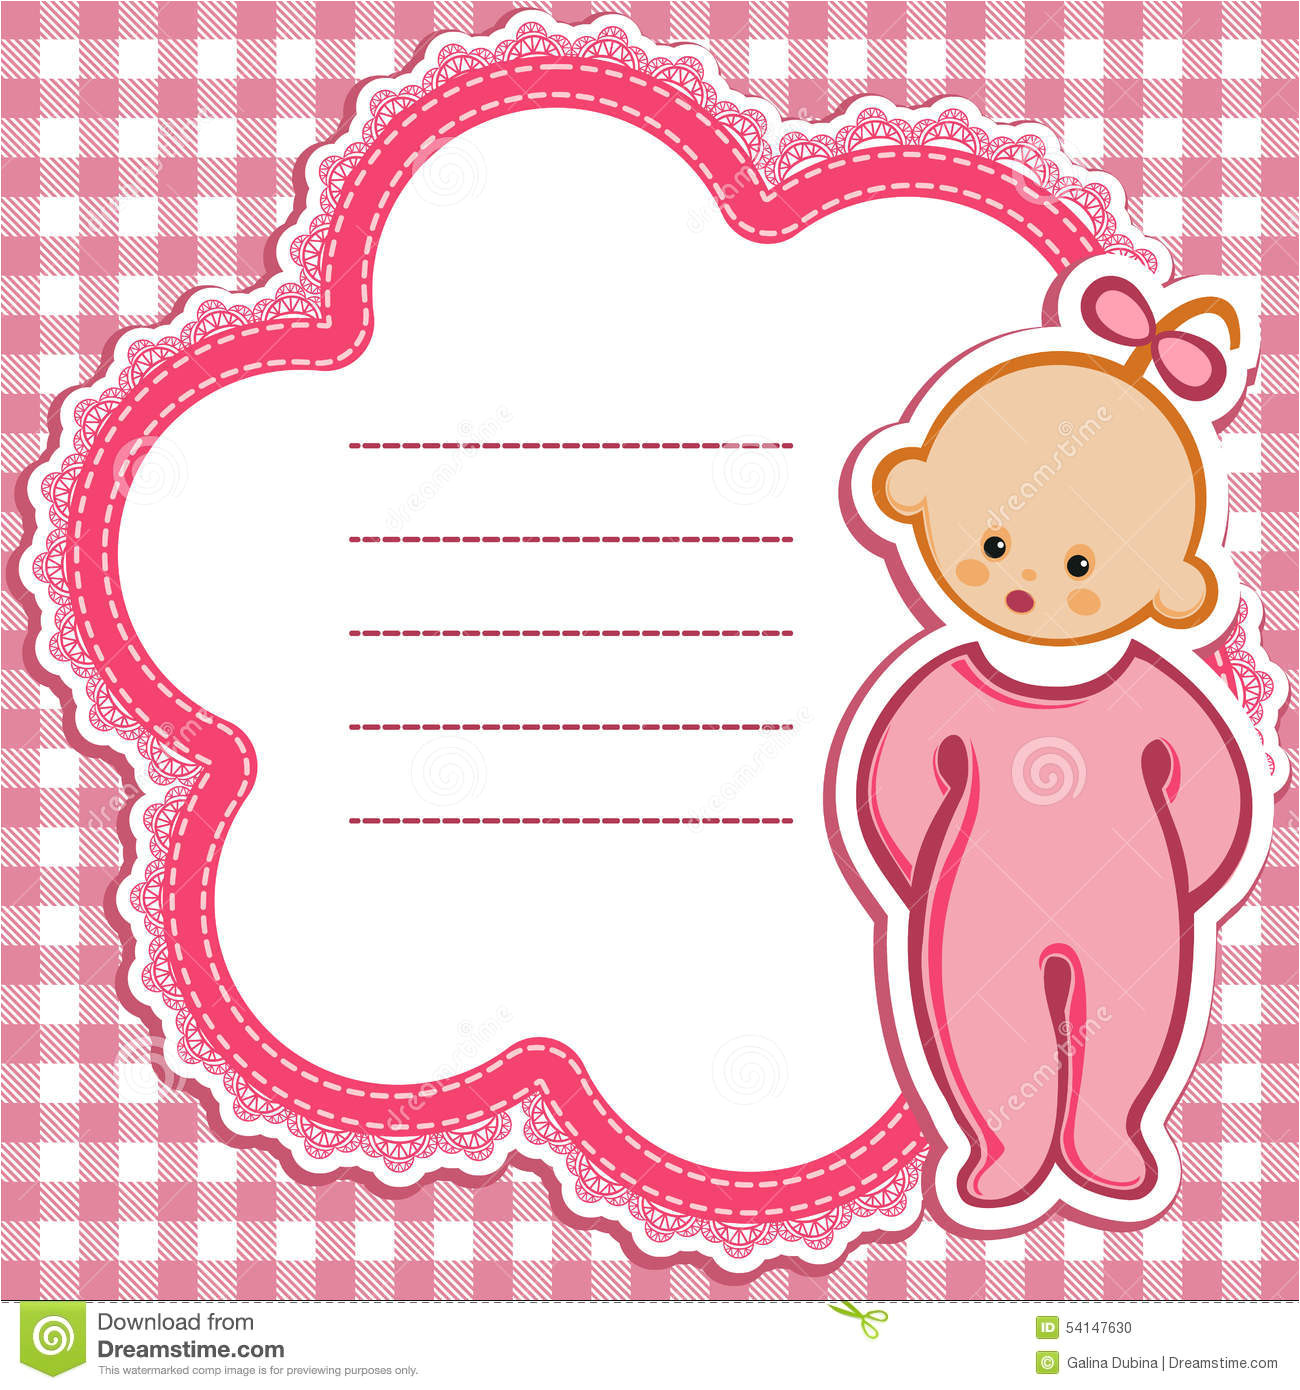 stock illustration card baby girl birthday nice greeting template cute simple artistic hand drawn illustration doodle shower greetings invitation image54147630